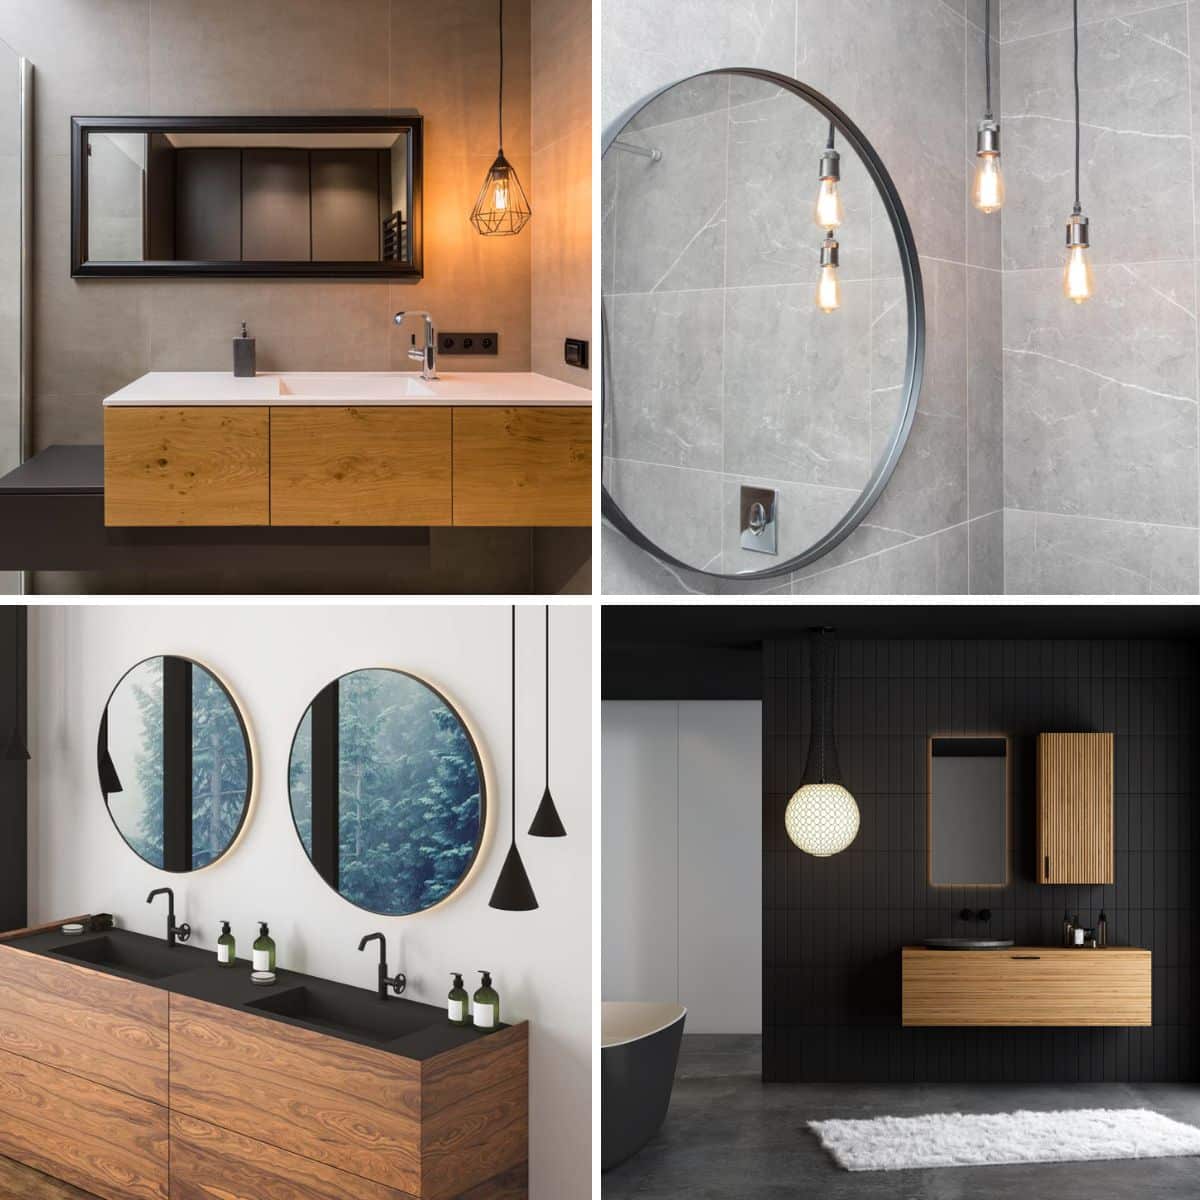 different bathroom designs with pendant style lighting